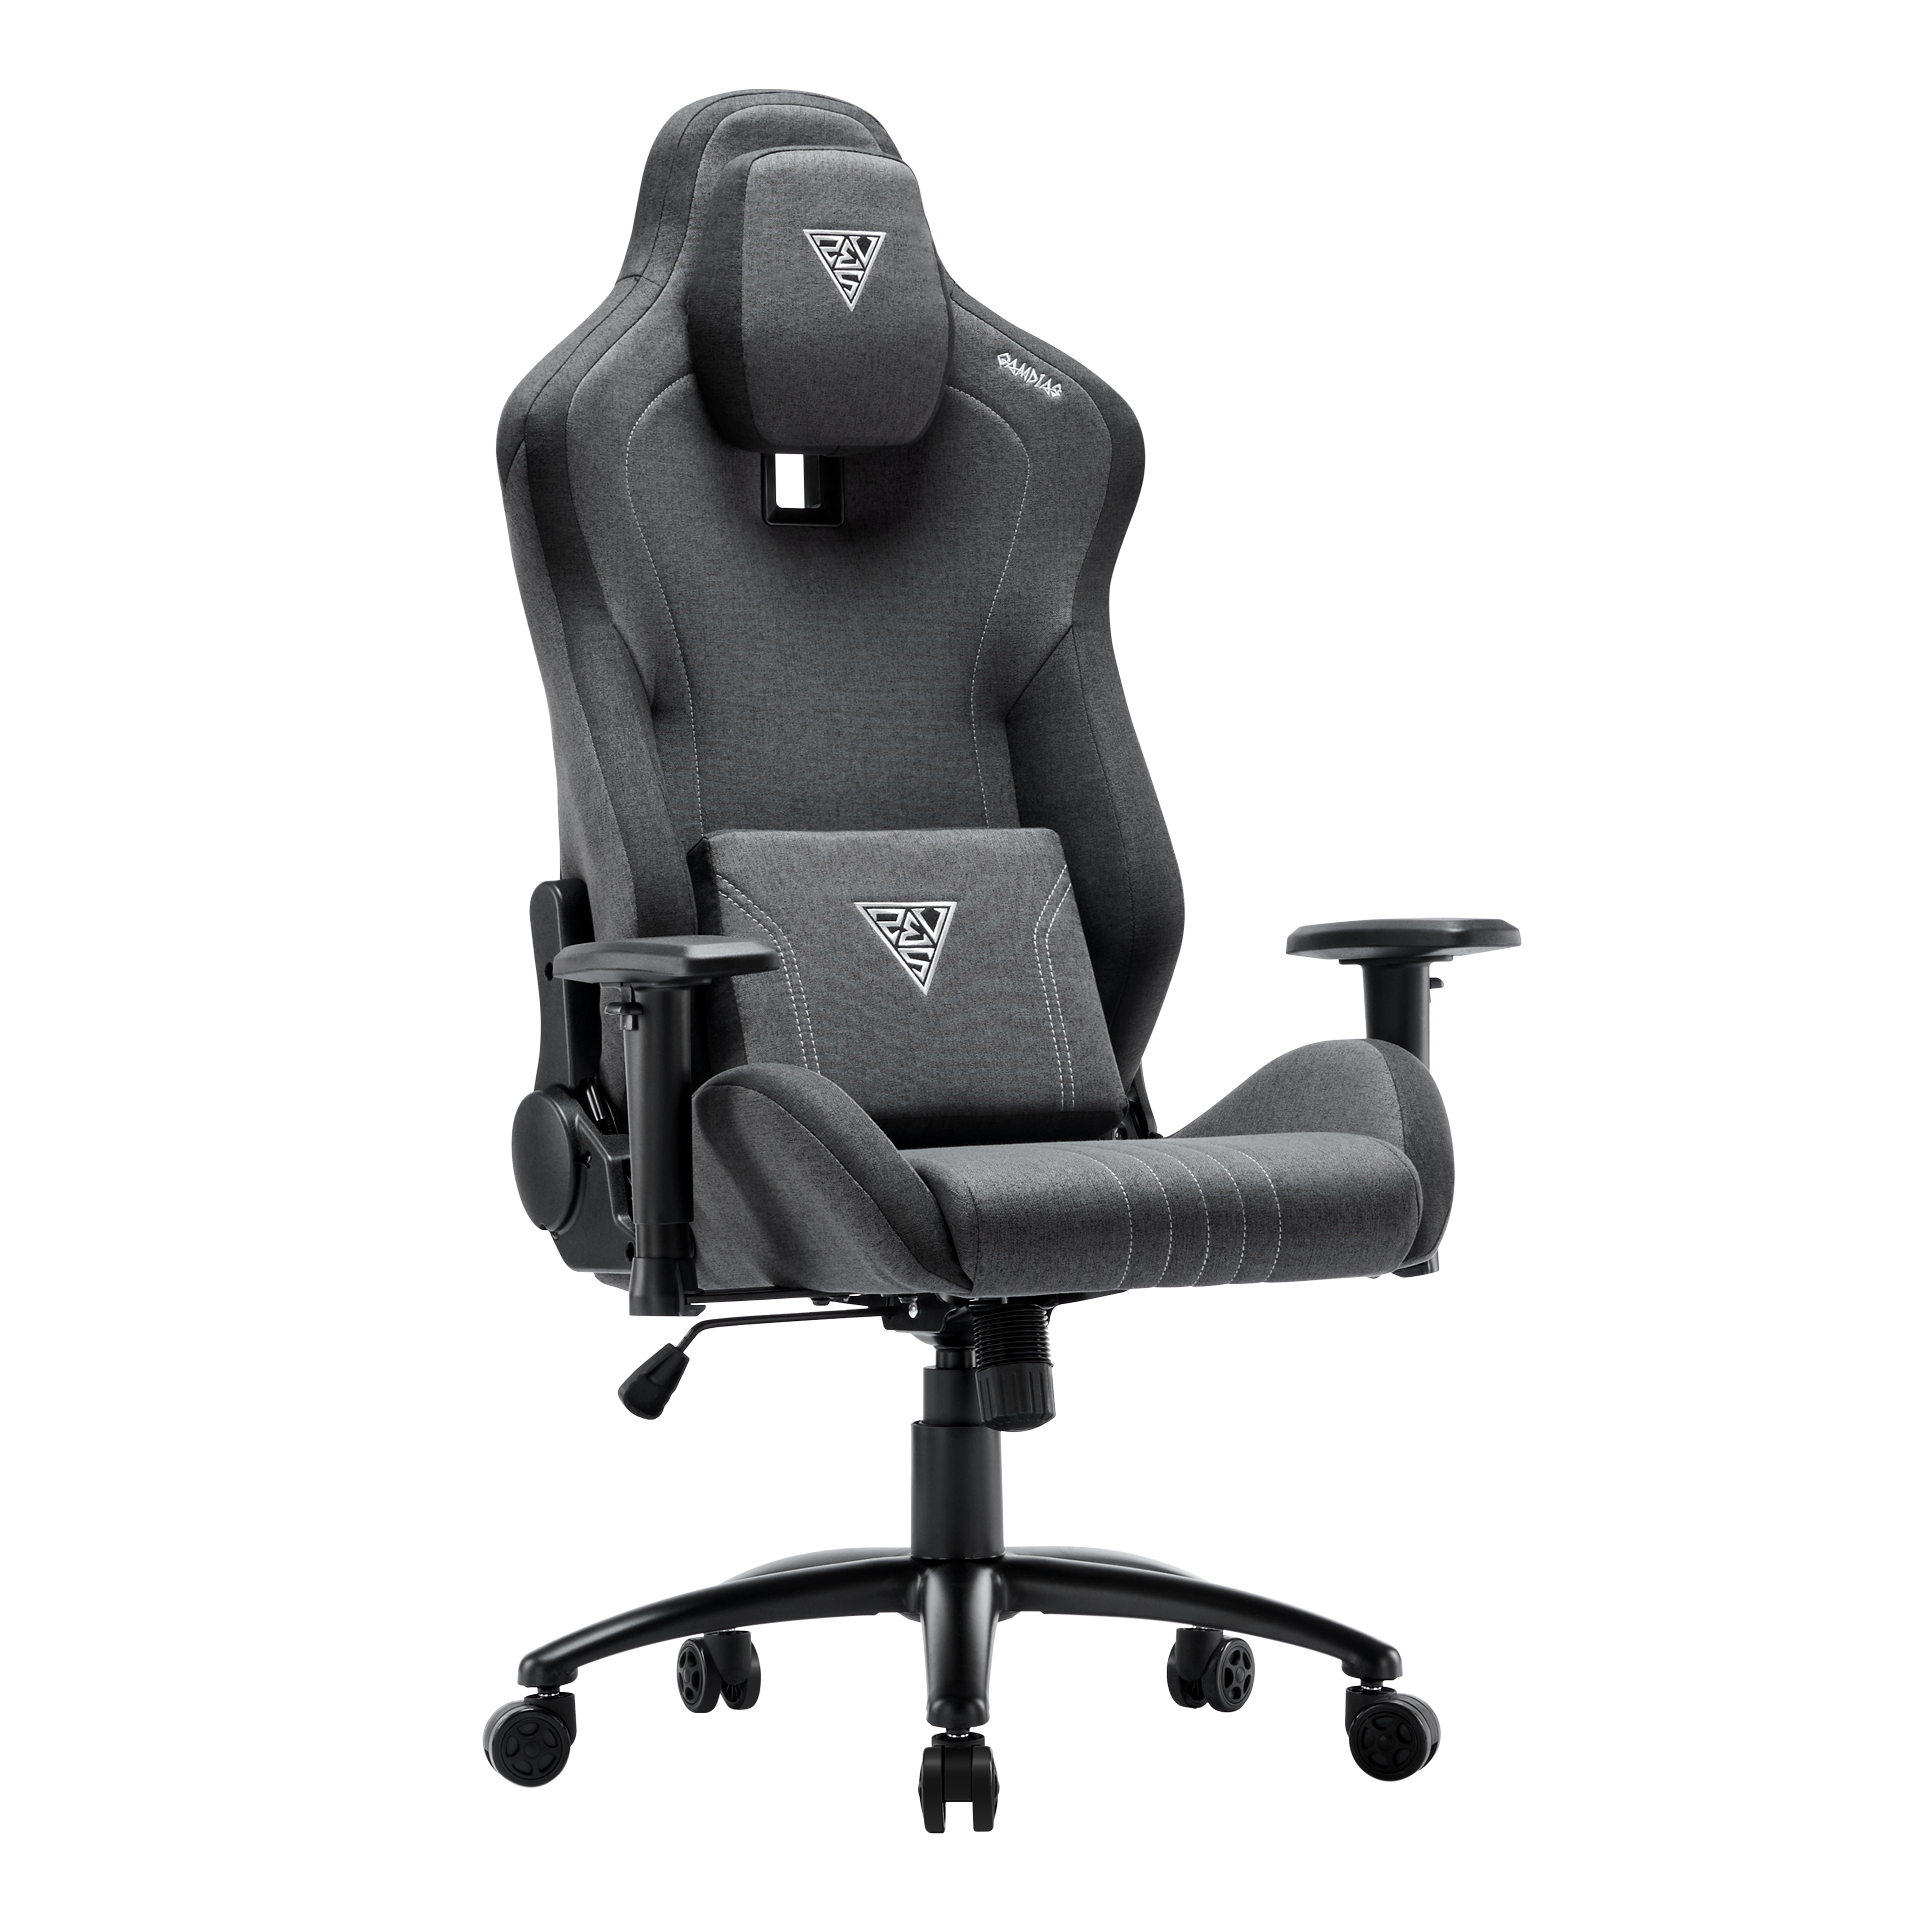 ZELUS M3 WEAVE Gaming Chair